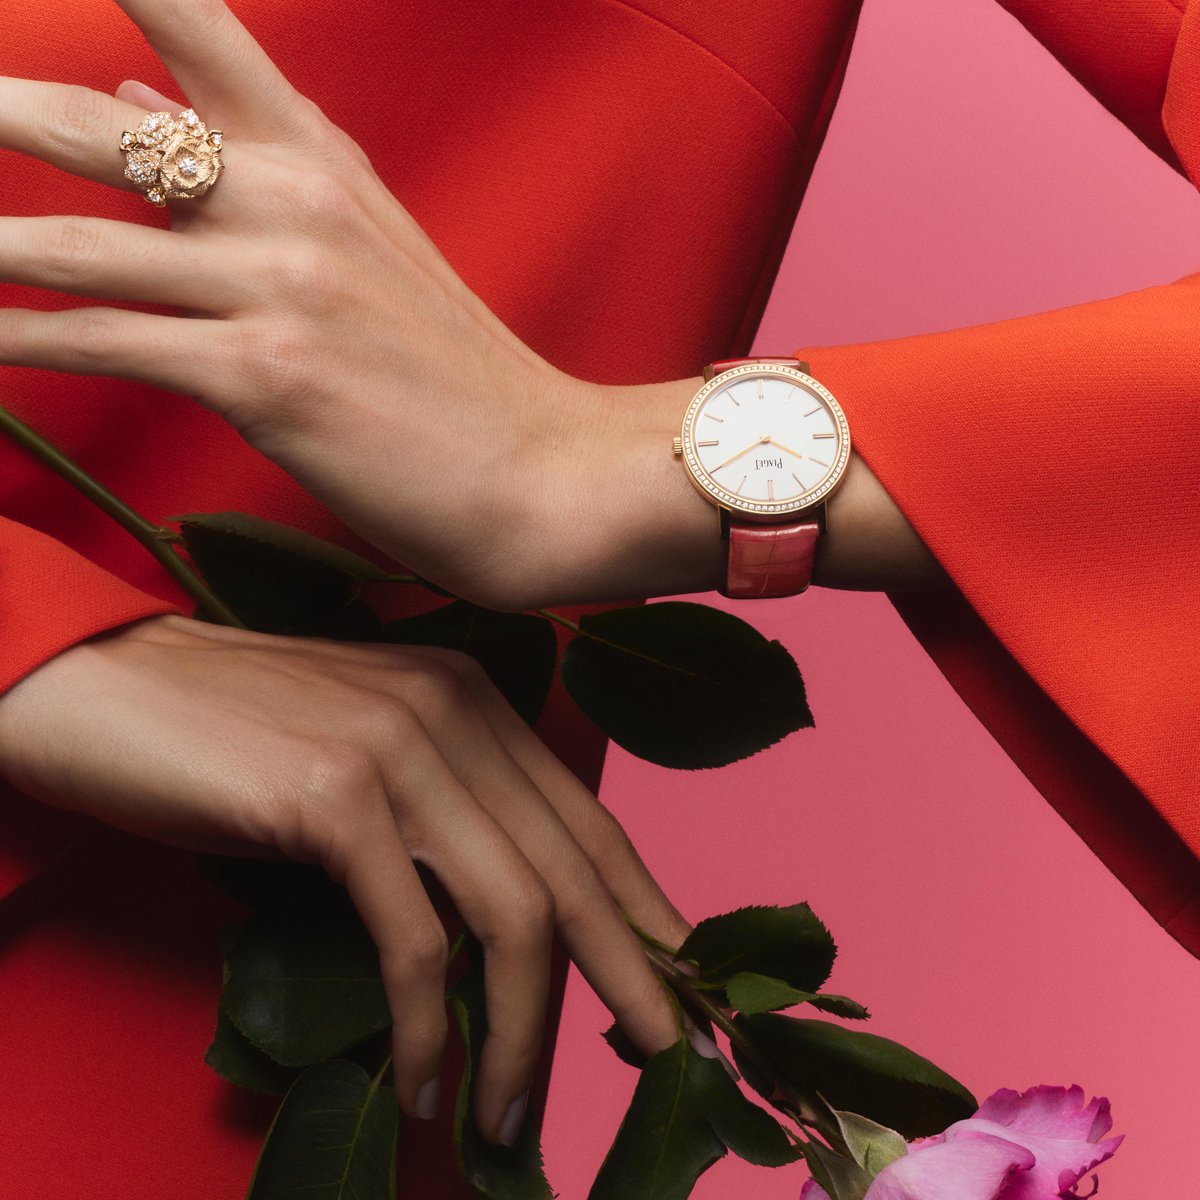 This #PiagetAltiplano merges ultra-thinness with romance in this rose gold timepiece finished with a red strap. A tribute to classic elegance, perfectly paired with our #PiagetRose collection. #Piaget #WatchToday #WomensWatch